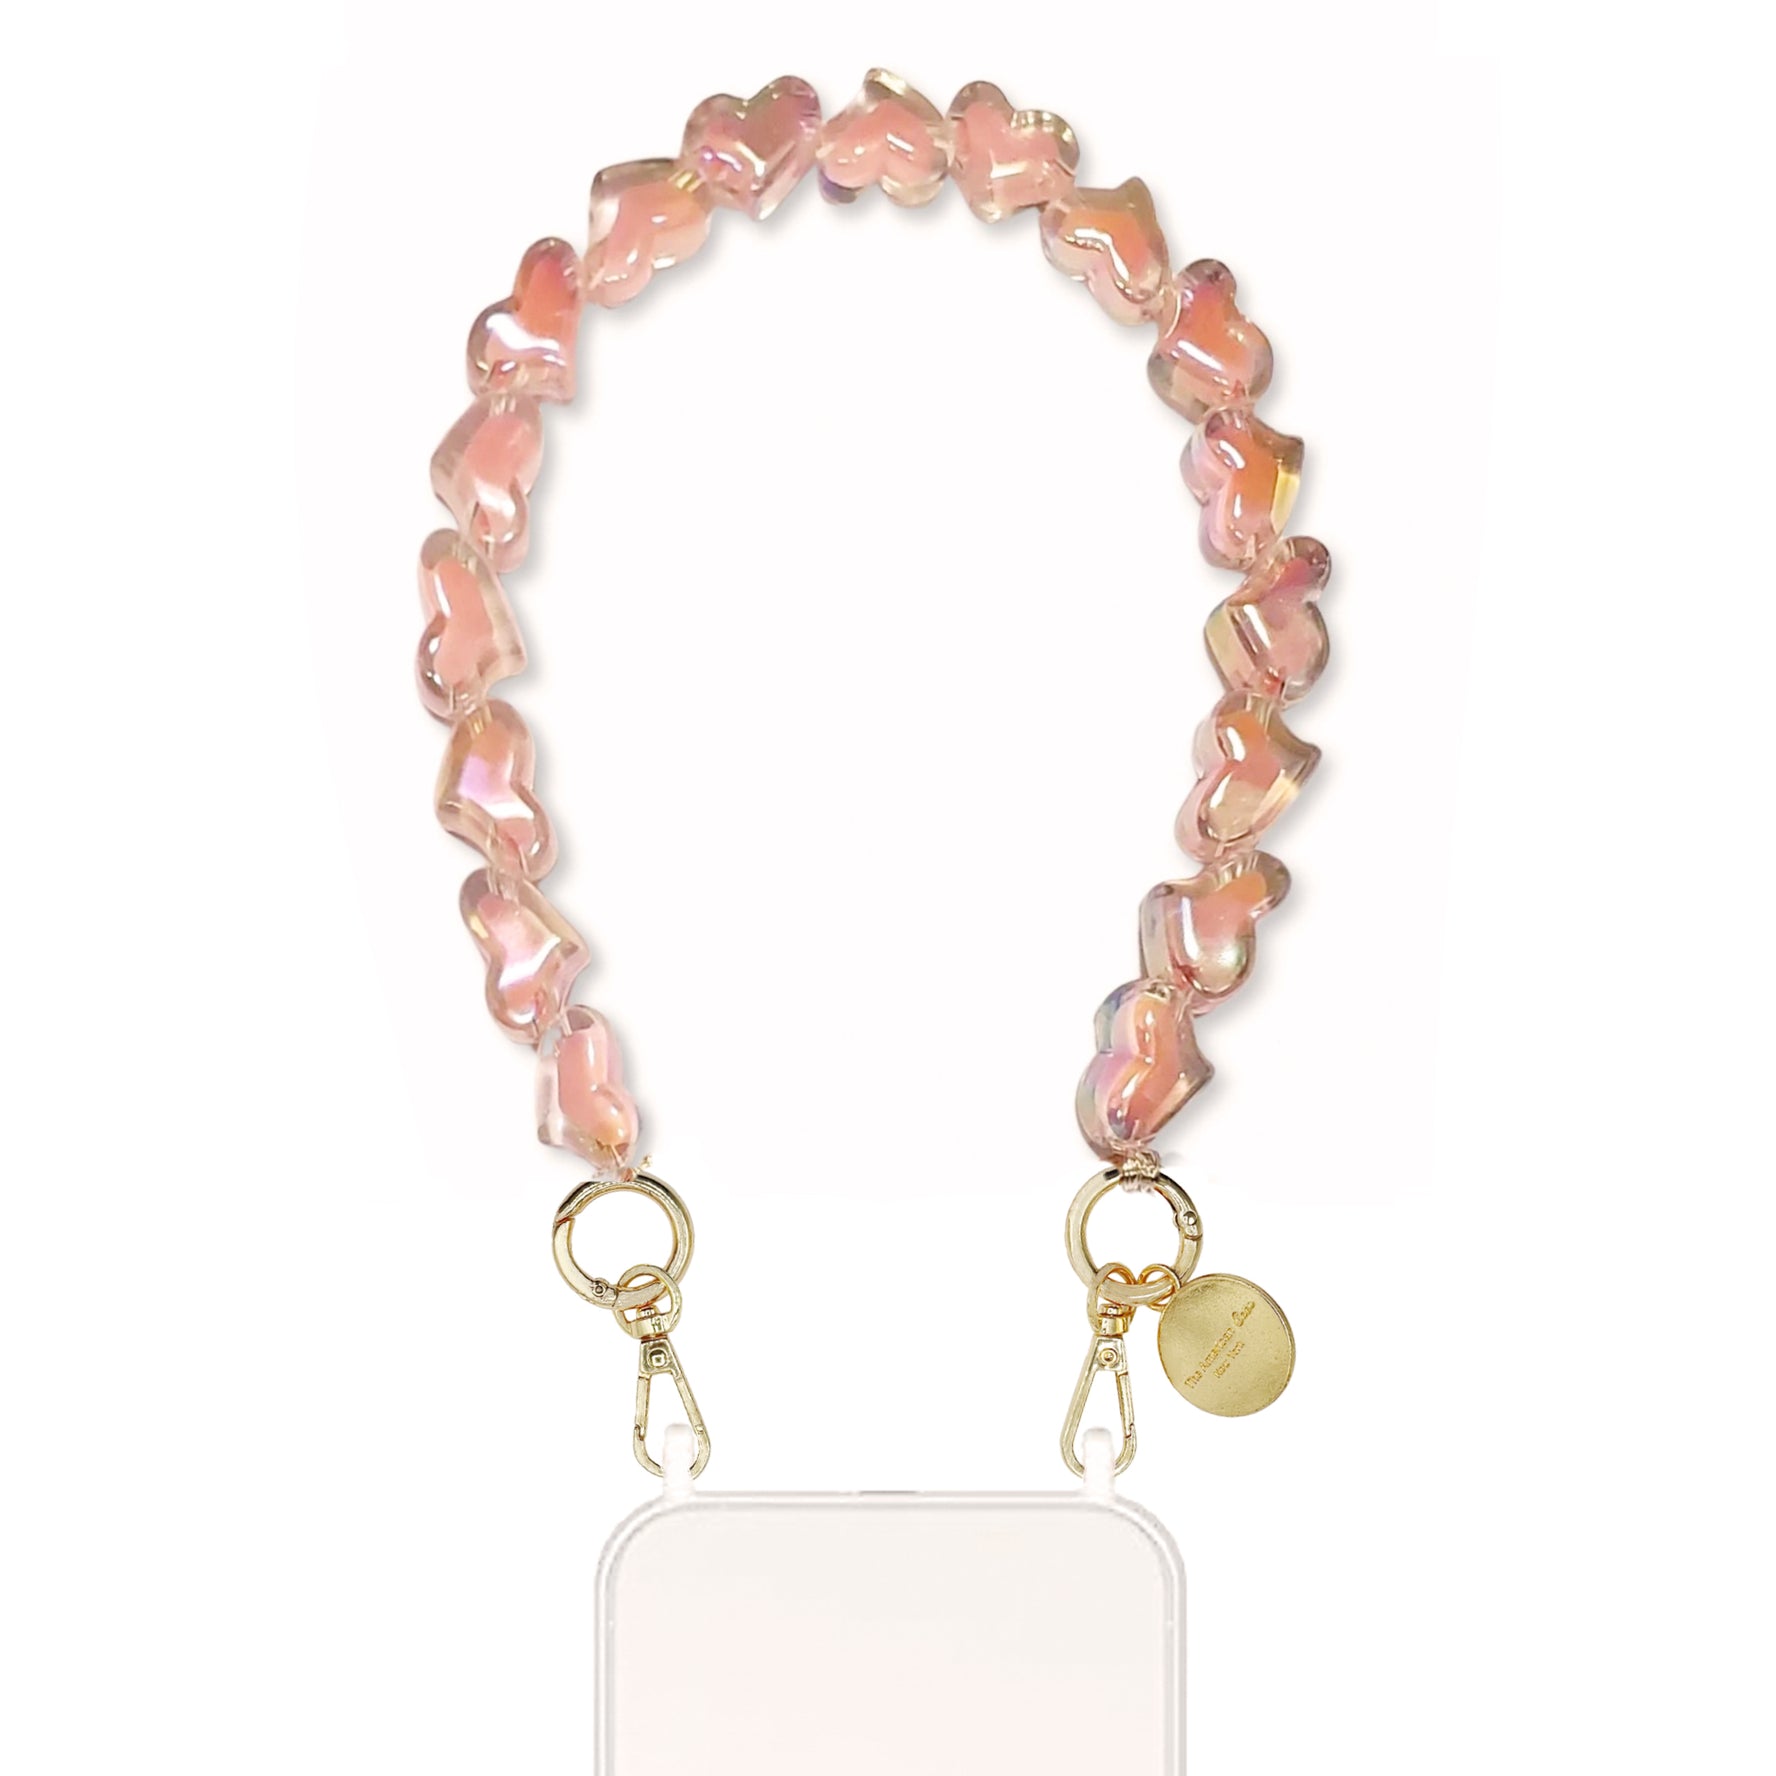 Candice - Baby Pink Glitter Heart Bead Short Chain with Golden Carabiners